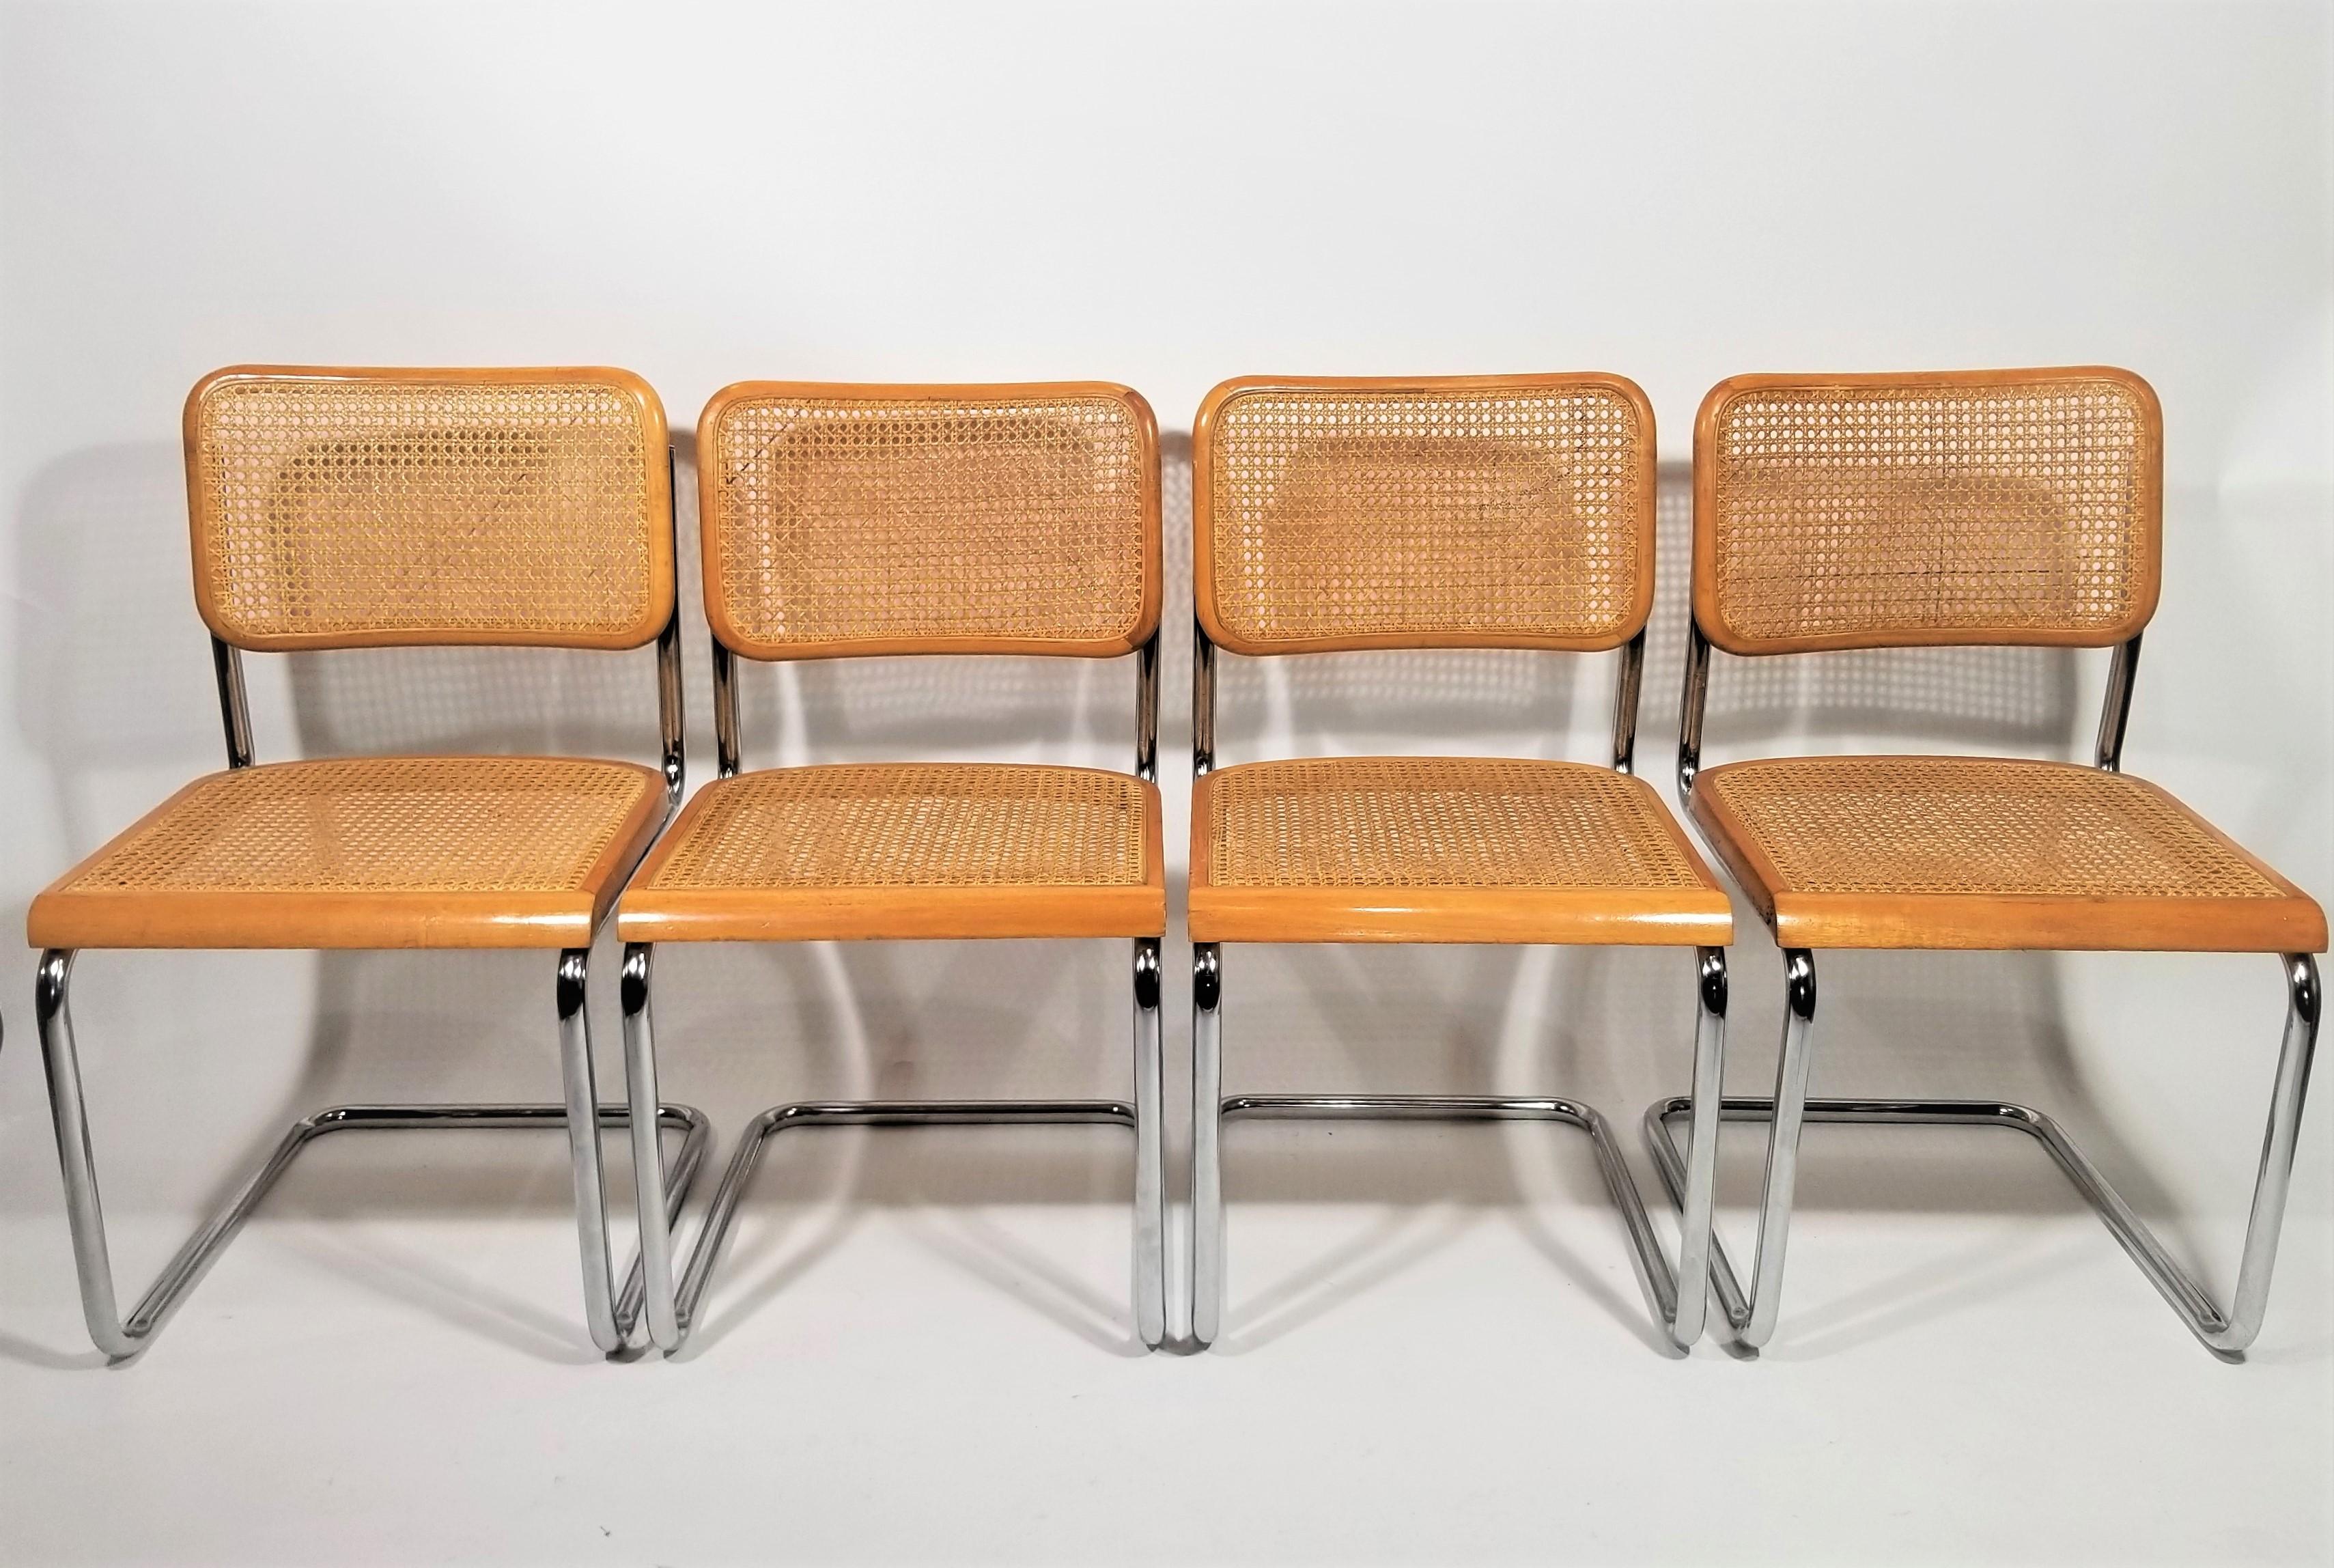 Vintage Mid Century 1970s Marcel Breuer Cesca Side Chairs or Dining Chairs. Cane seats and backs. Chrome cantilever frames. We polish all chrome. Set of 4

Complimentary delivery is available for this item in NYC and surrounding areas.